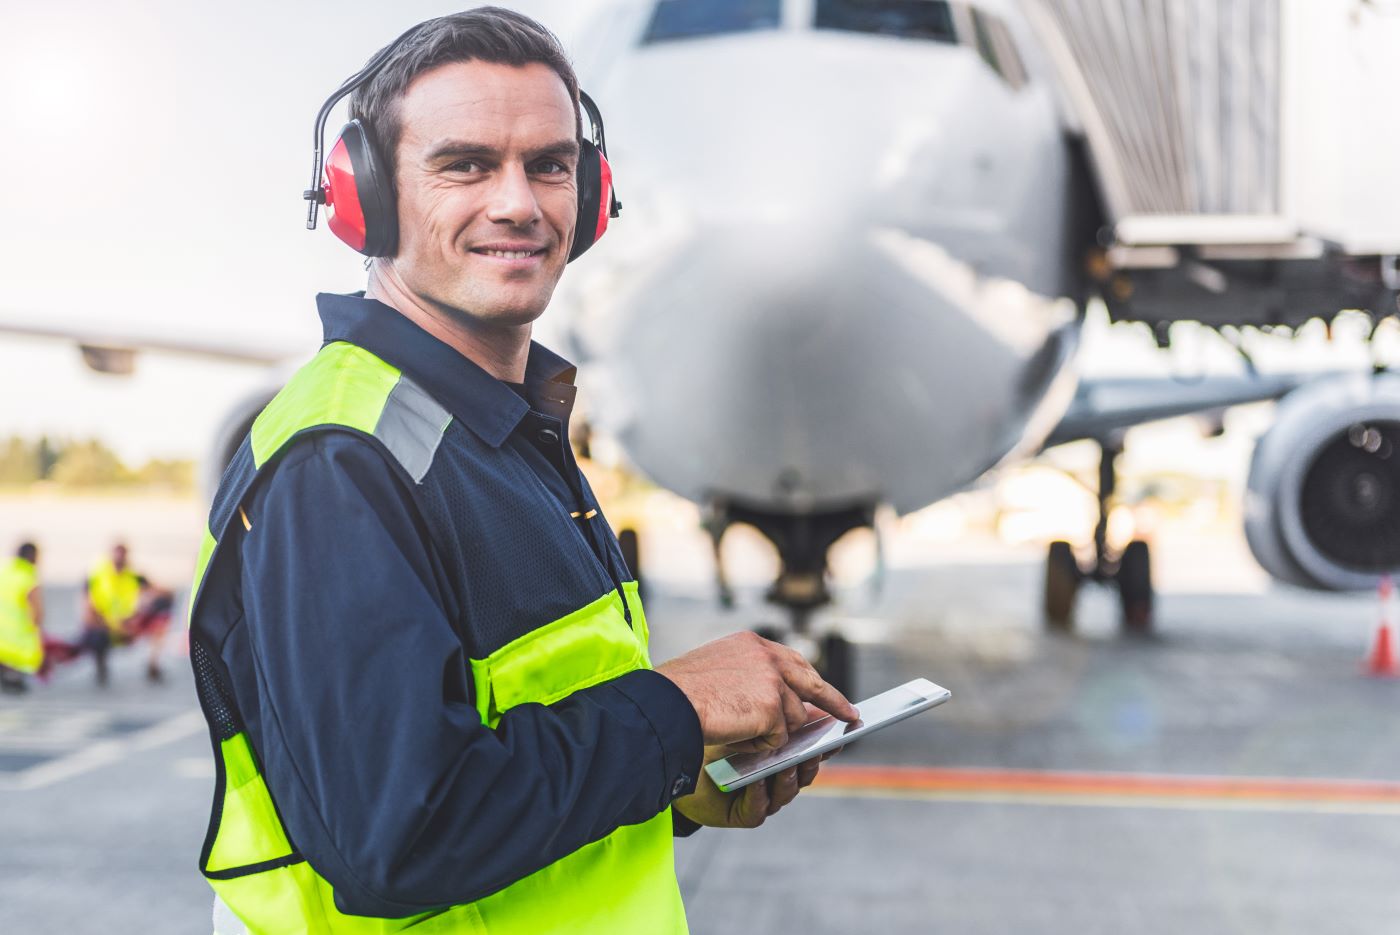 Digital Transformation in Aviation Jobs: Opportunities and Skills. What will change in 2024?